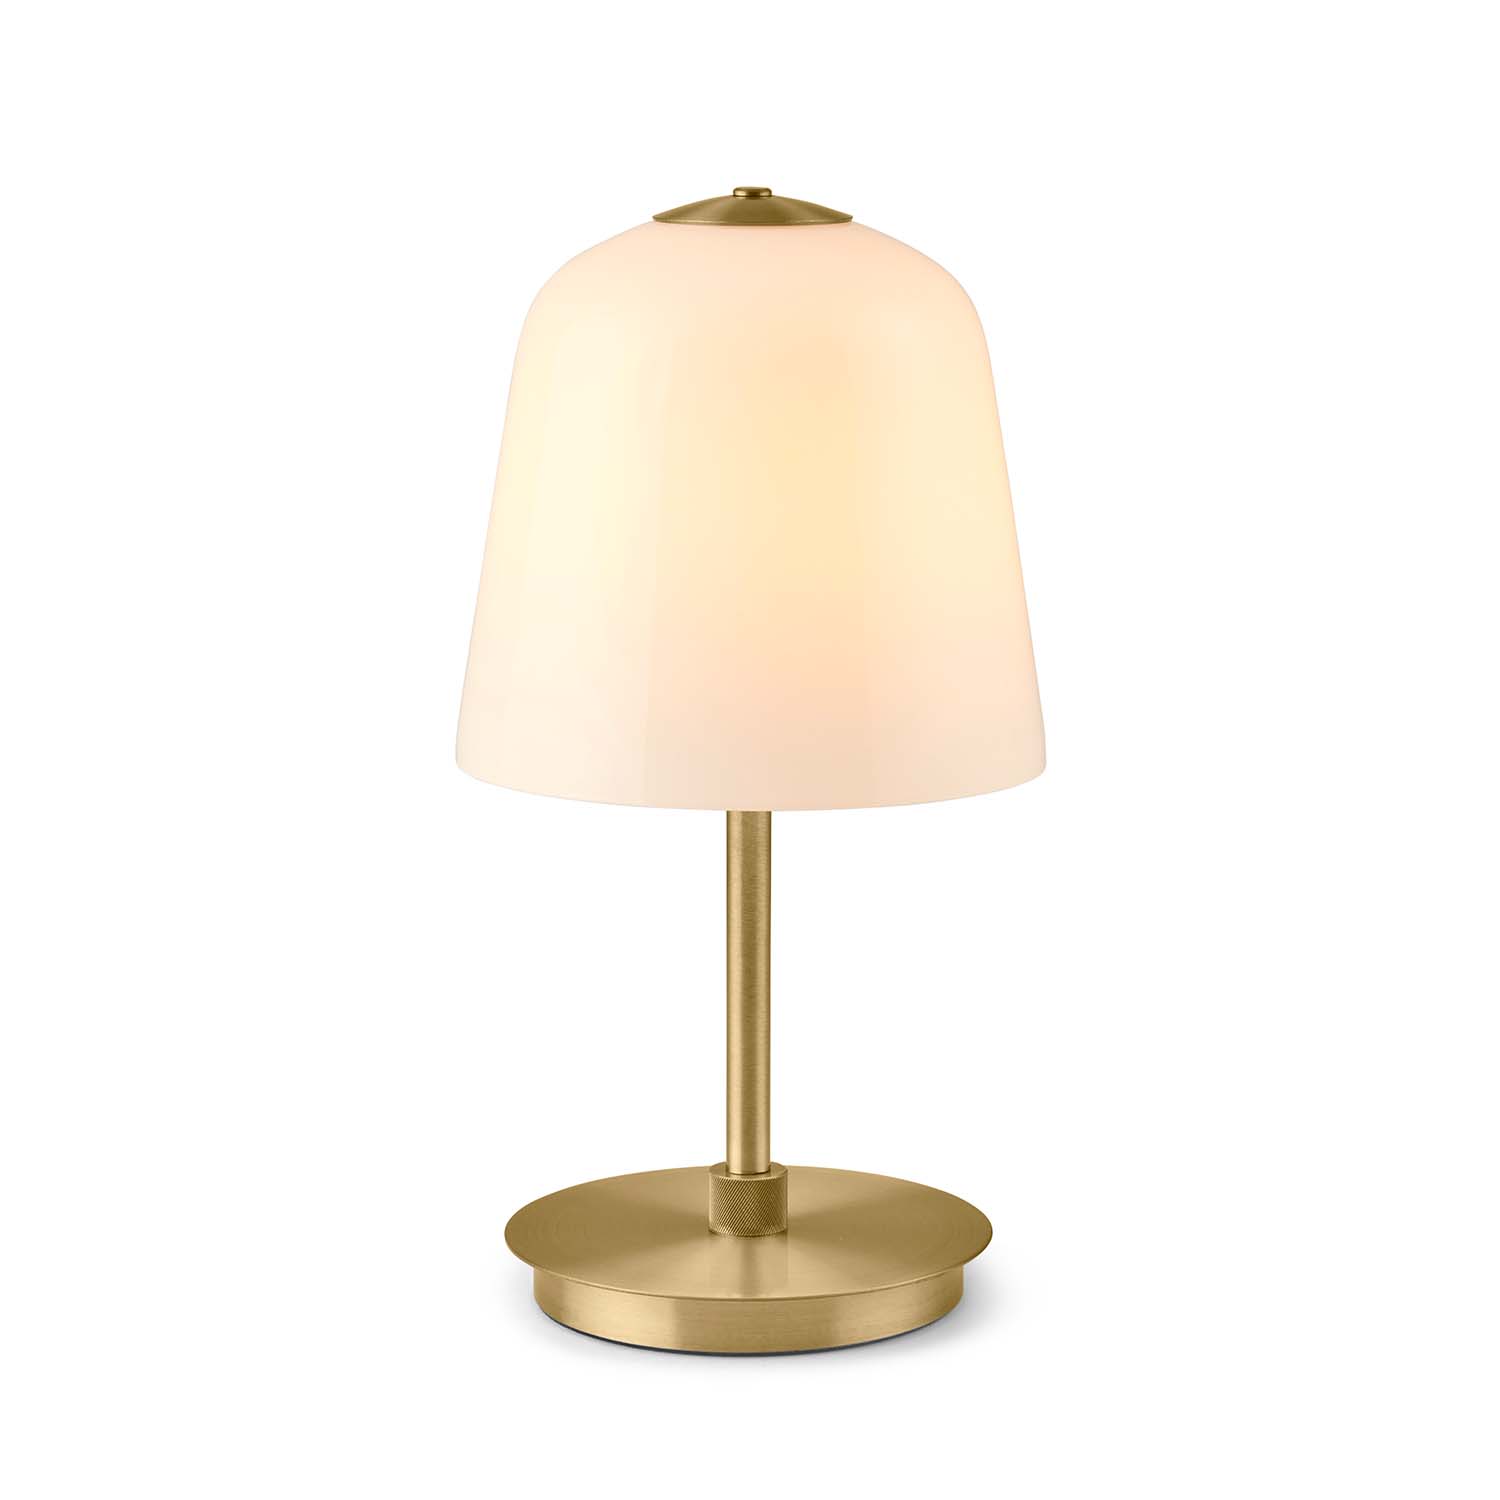 ROOM 49 - Portable blown glass and brass lamp